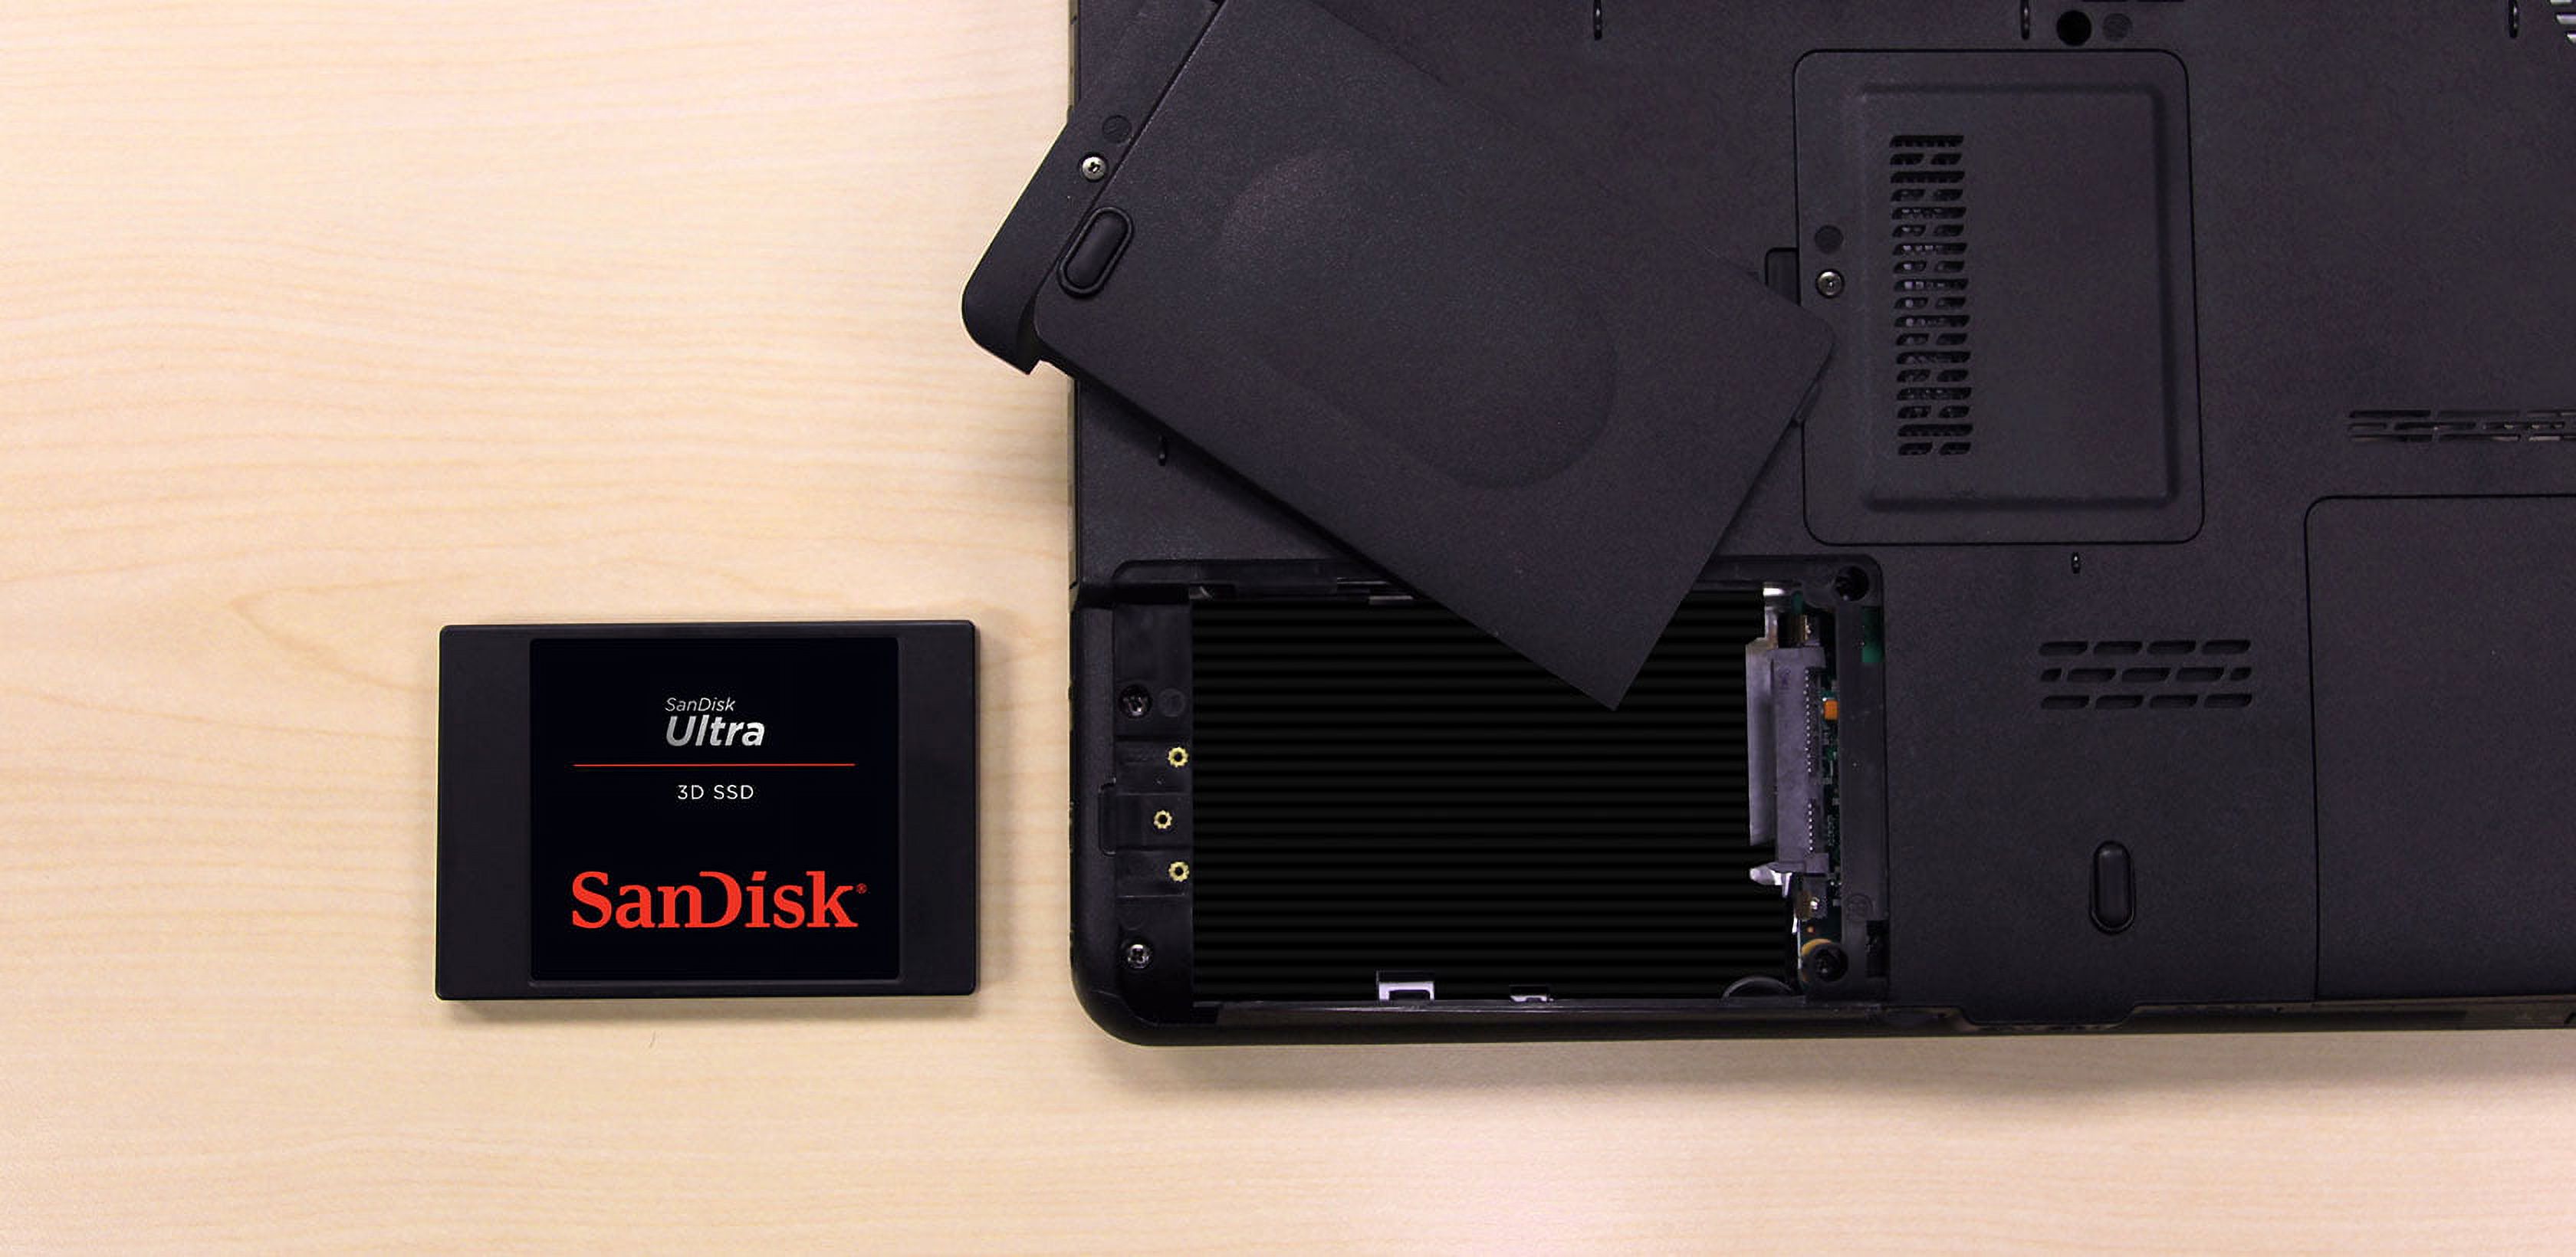 SanDisk 500GB Ultra 3D NAND SSD, Internal Solid State Drive - SDSSDH3-500G-G25 - image 5 of 5